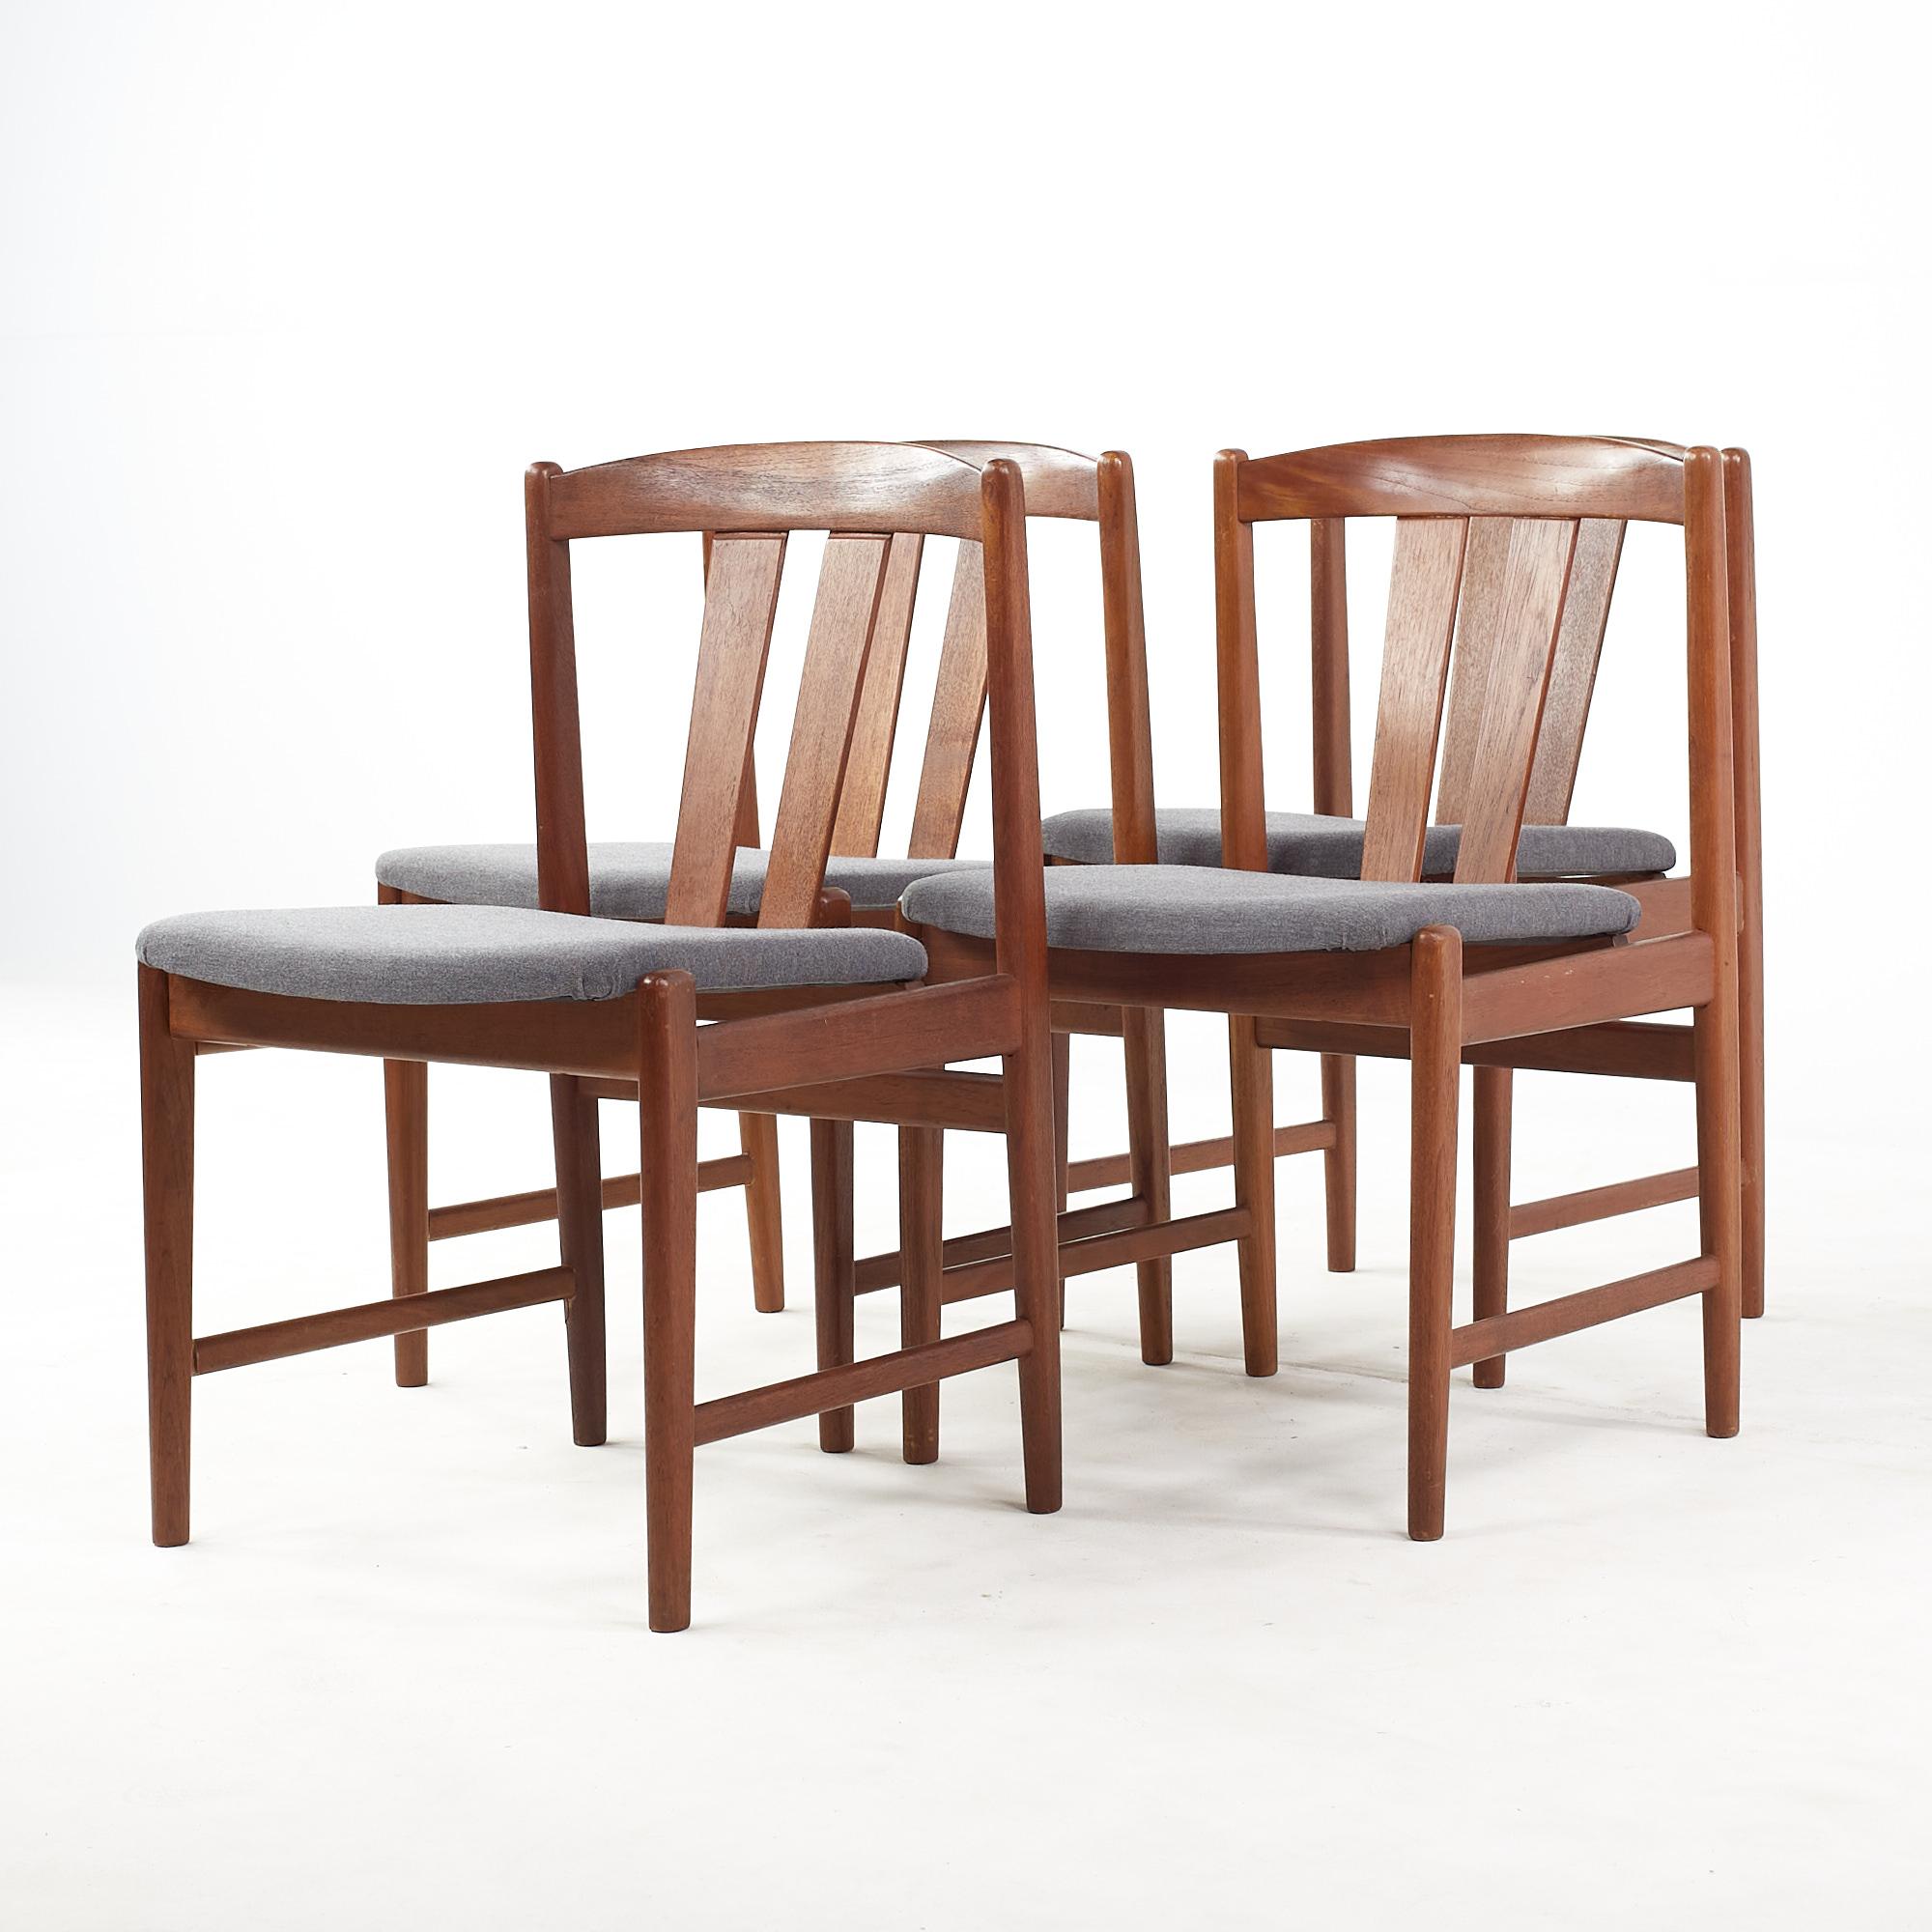 Mid-Century Modern Folke Ohlsson for Dux Mid Century Teak Wishbone Dining Chairs - Set of 4 For Sale